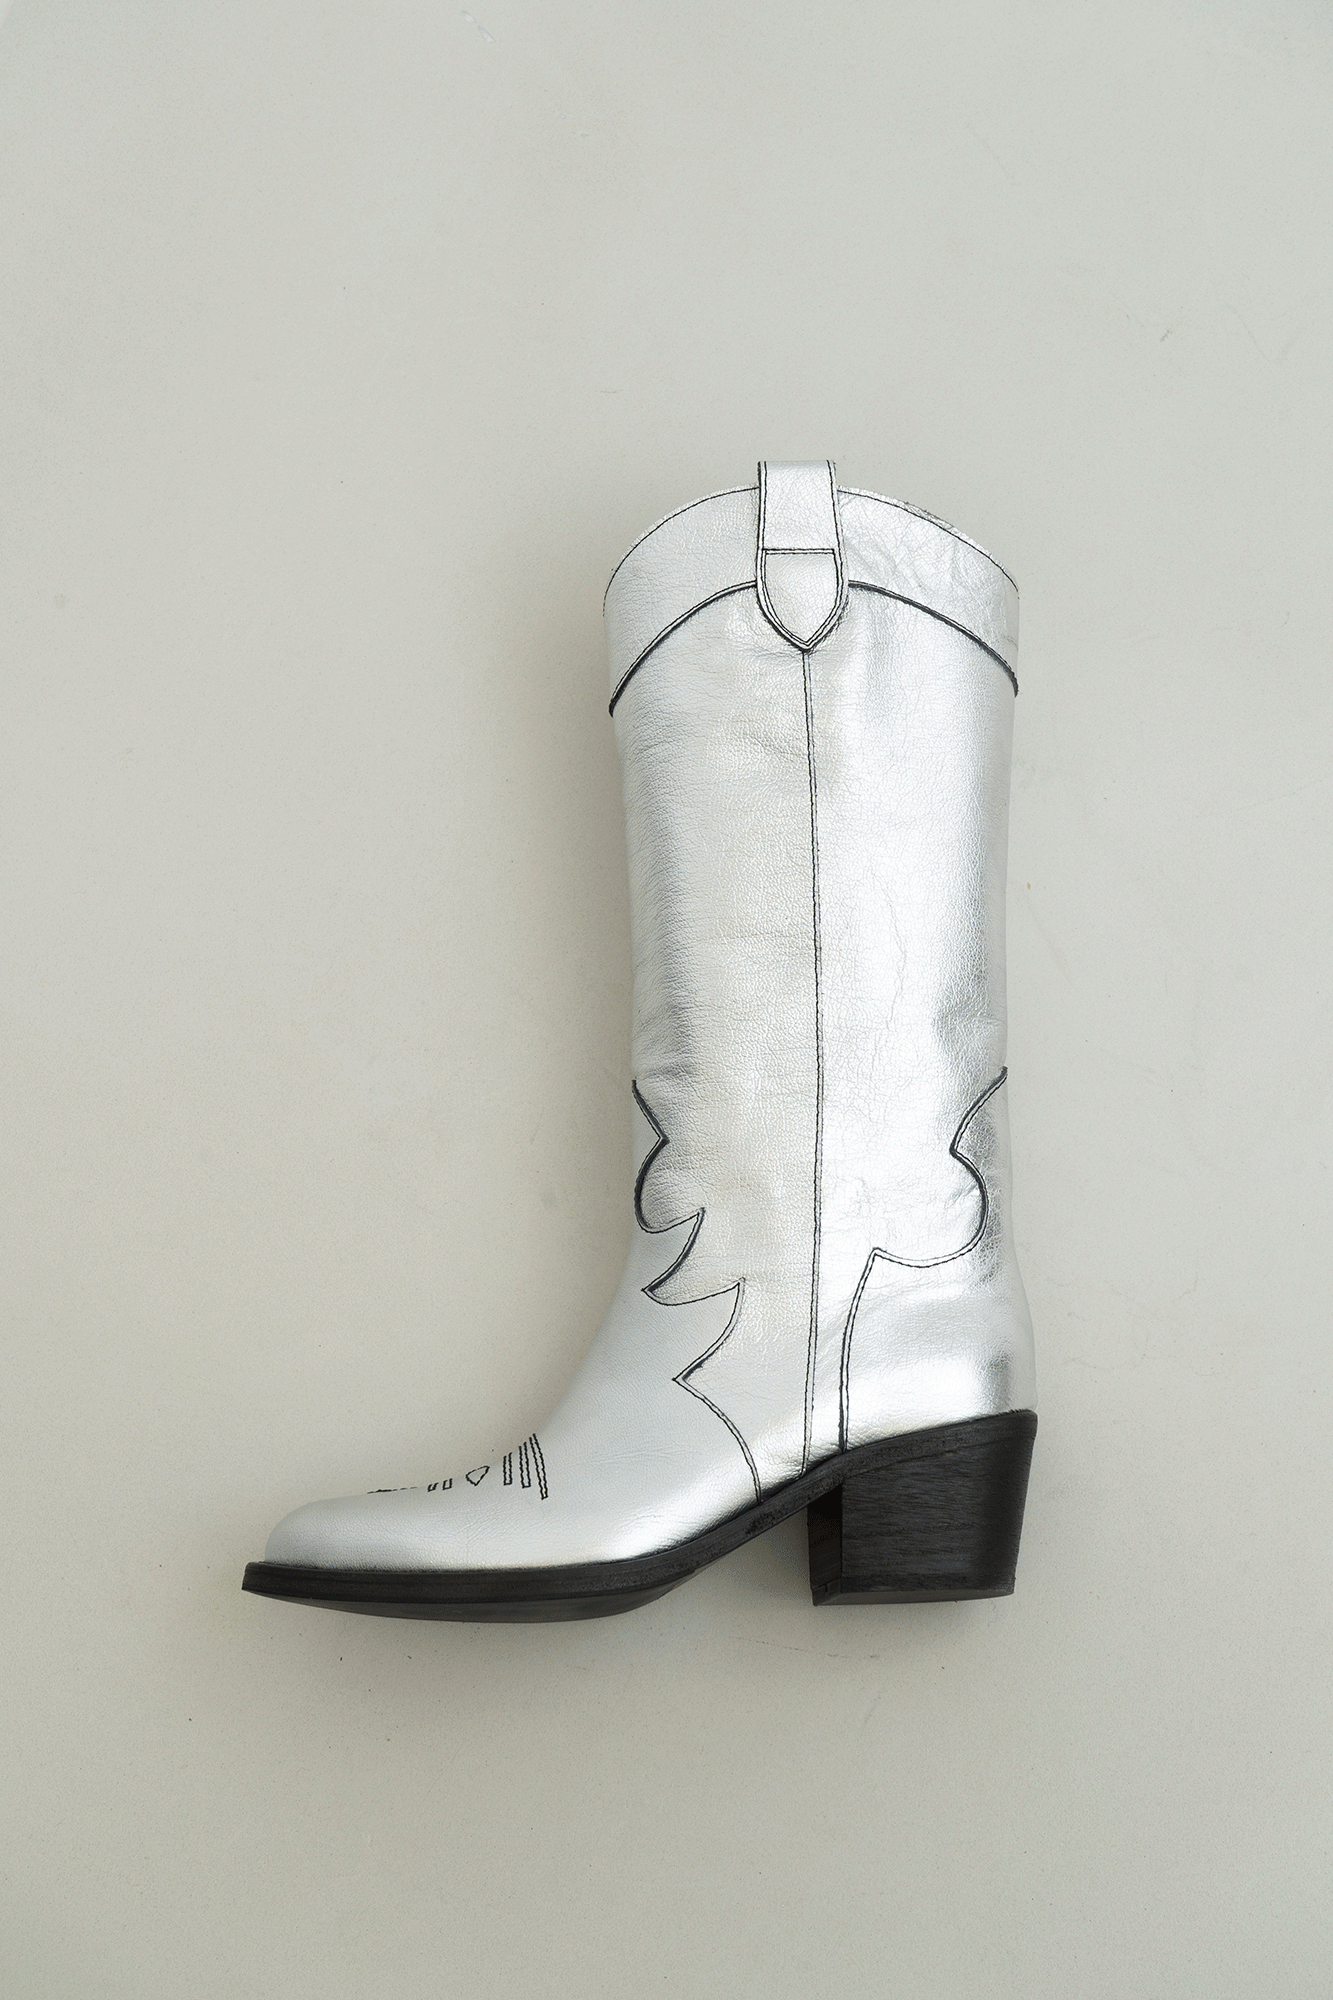 Wendy boots, silver leather